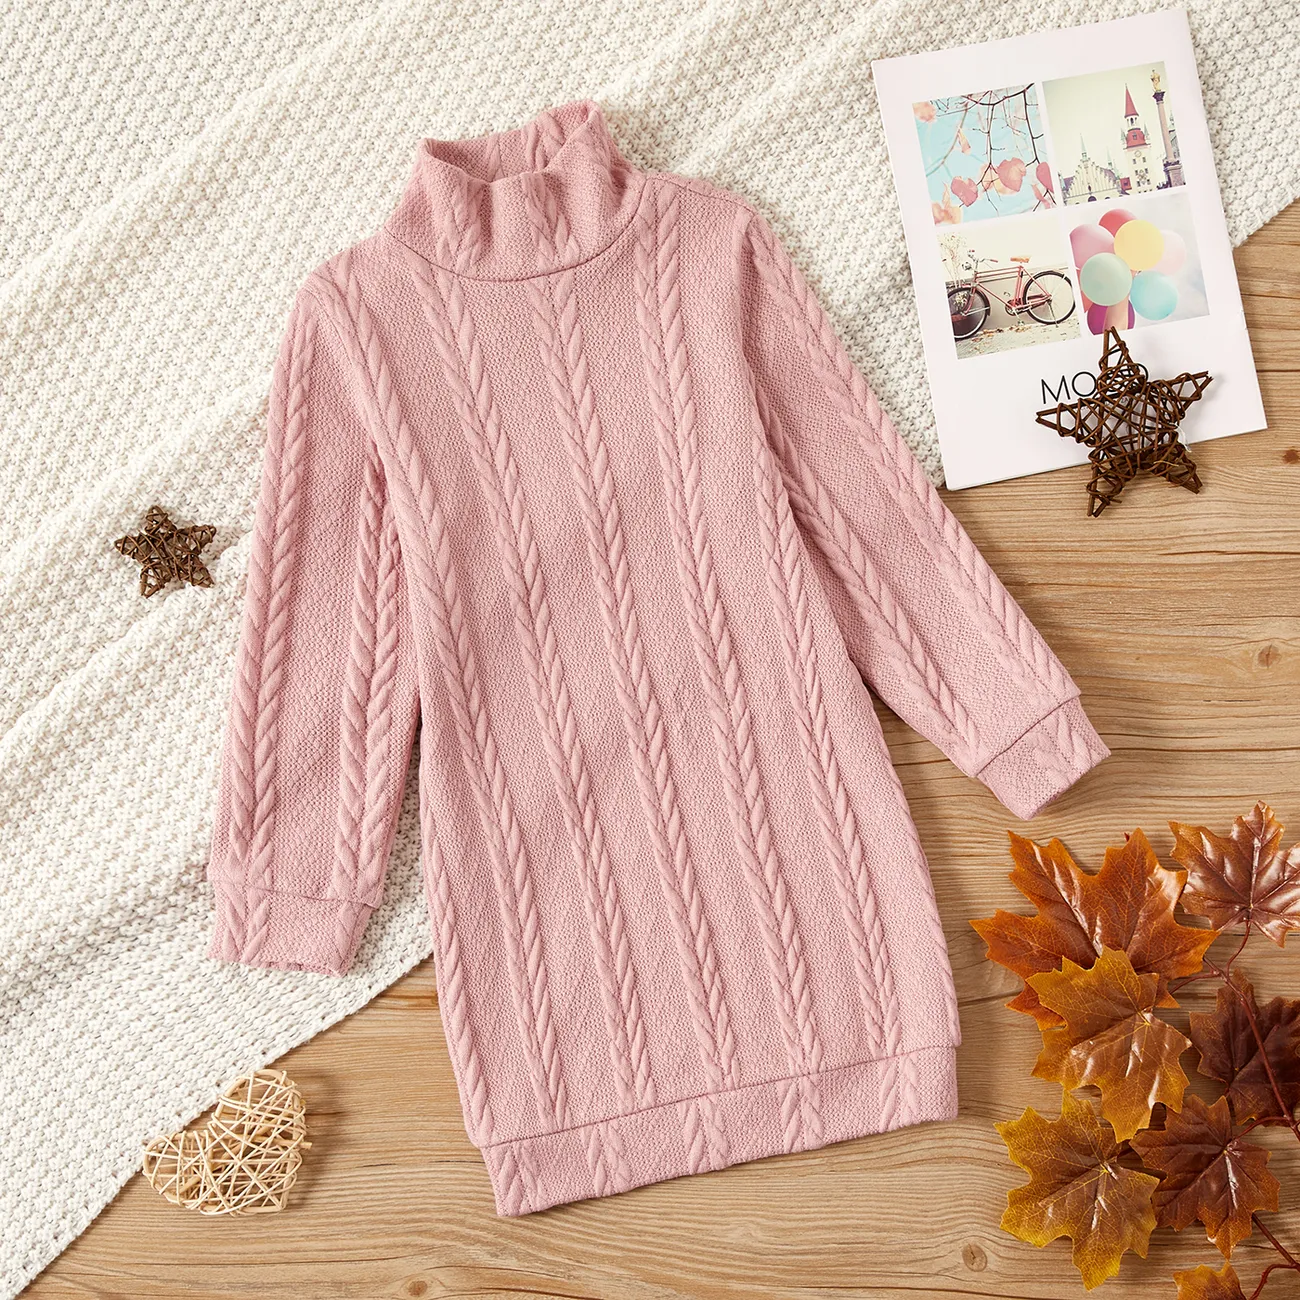 Kid Girl Solid Color Cable Knit Textured Mock neck Sweater Dress Pink big image 1